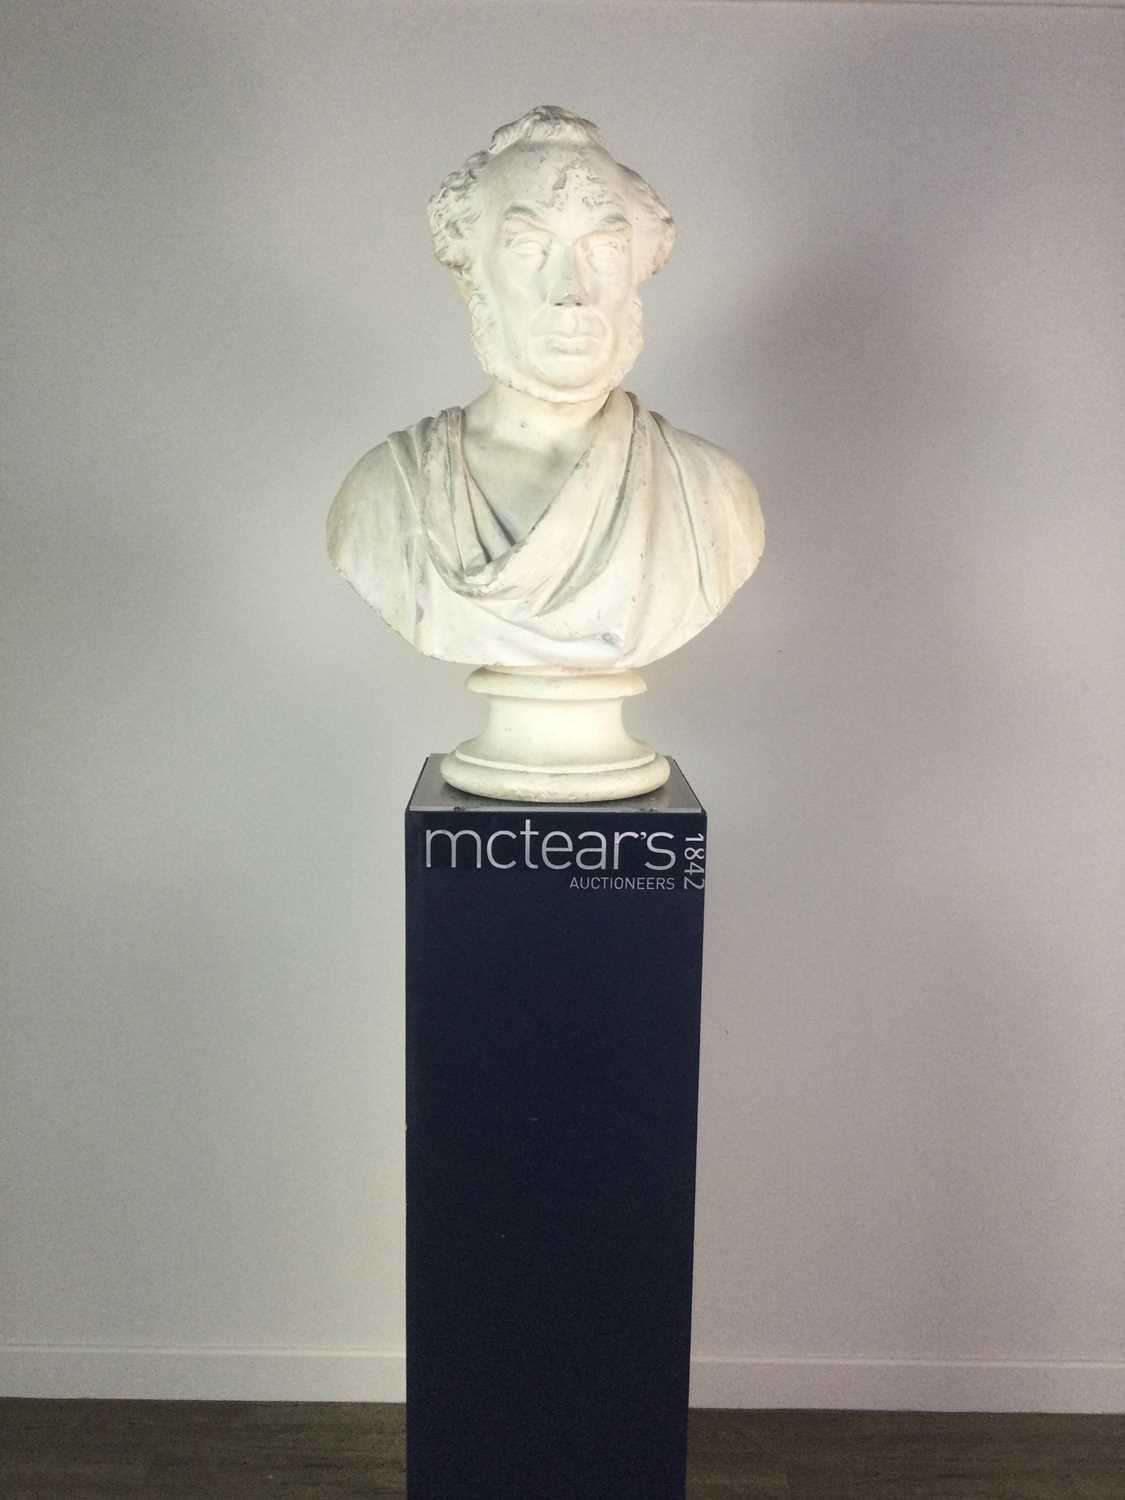 Lot 800 - 19TH CENTURY PLASTER BUST BY GEORGES-EDWIN EWING